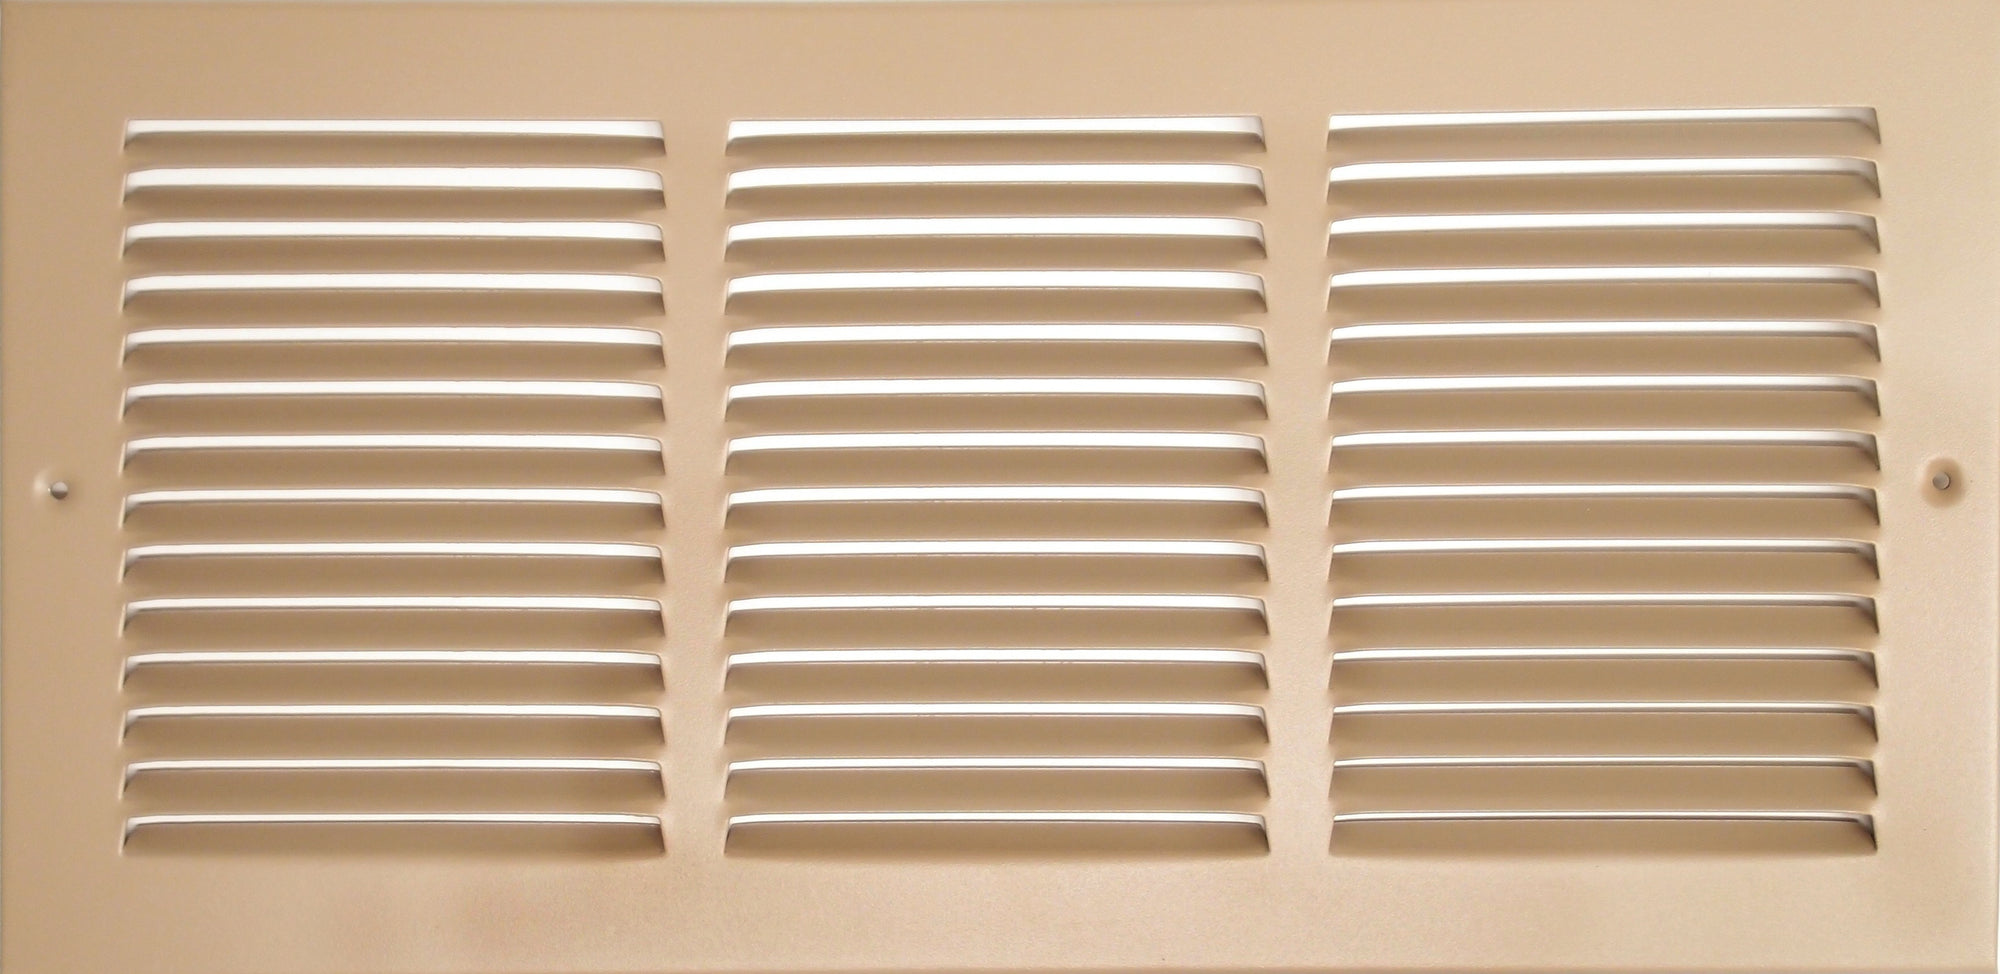 20" X 10" Air Vent Return Grilles - Sidewall and Ceiling - Steel